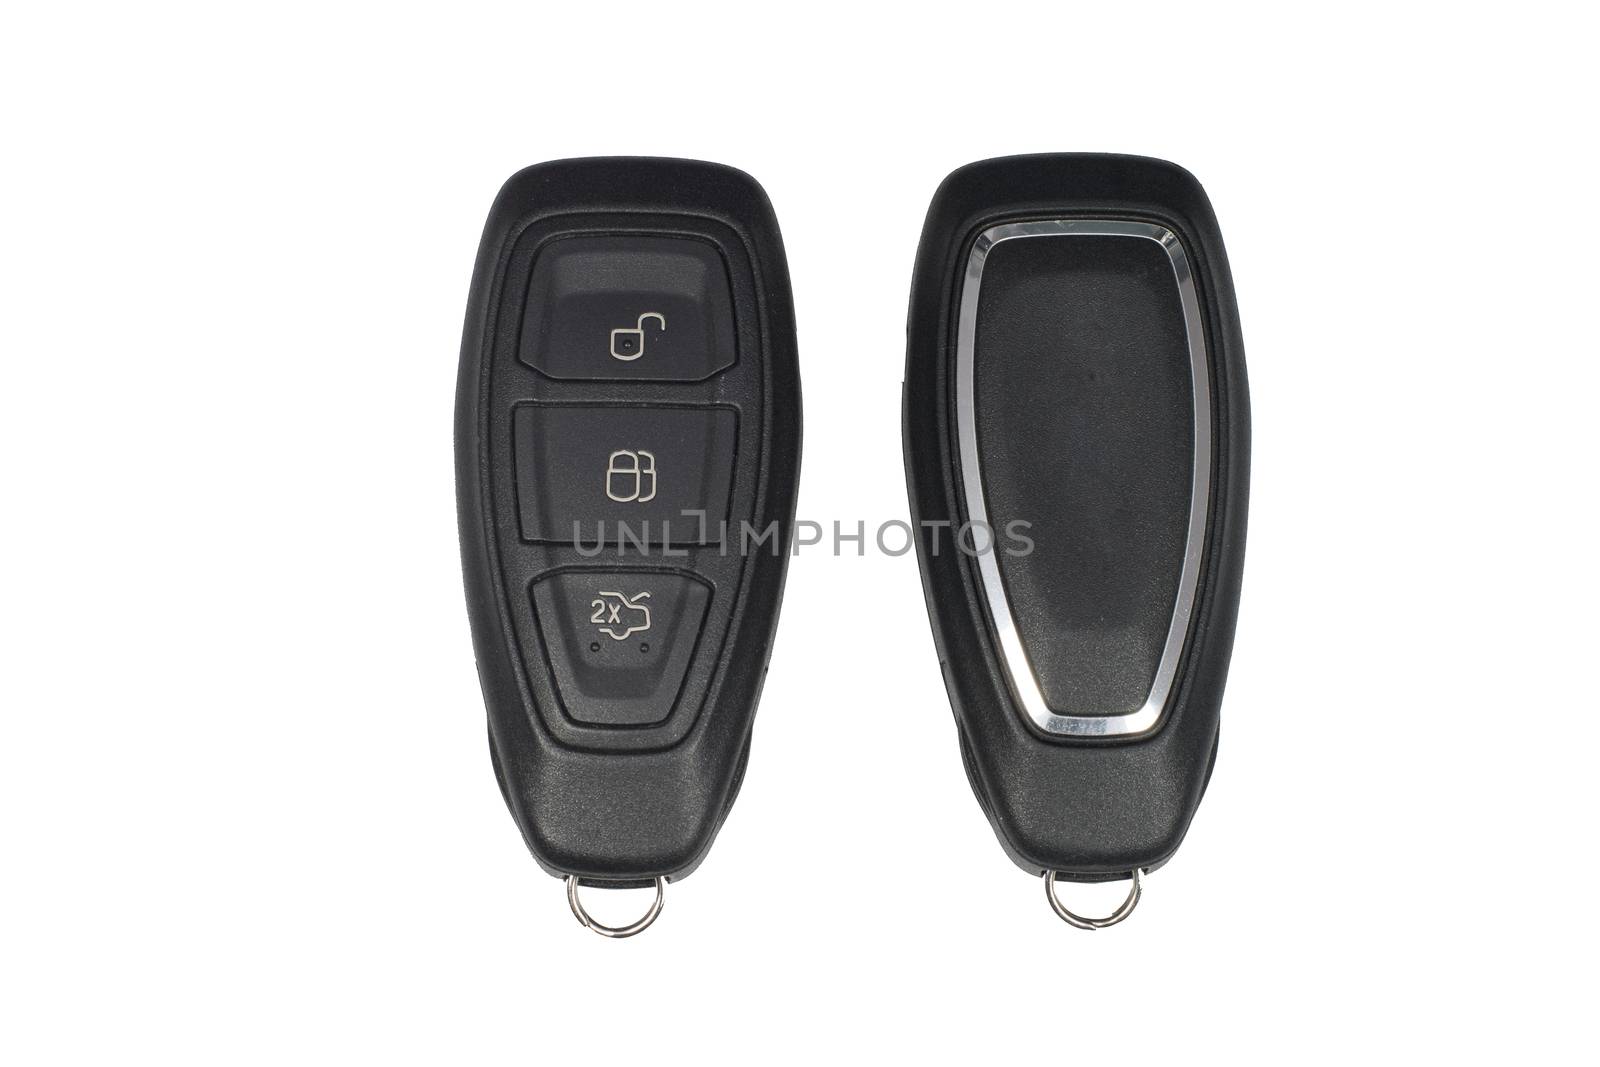 Keyless car key fob showing front and back